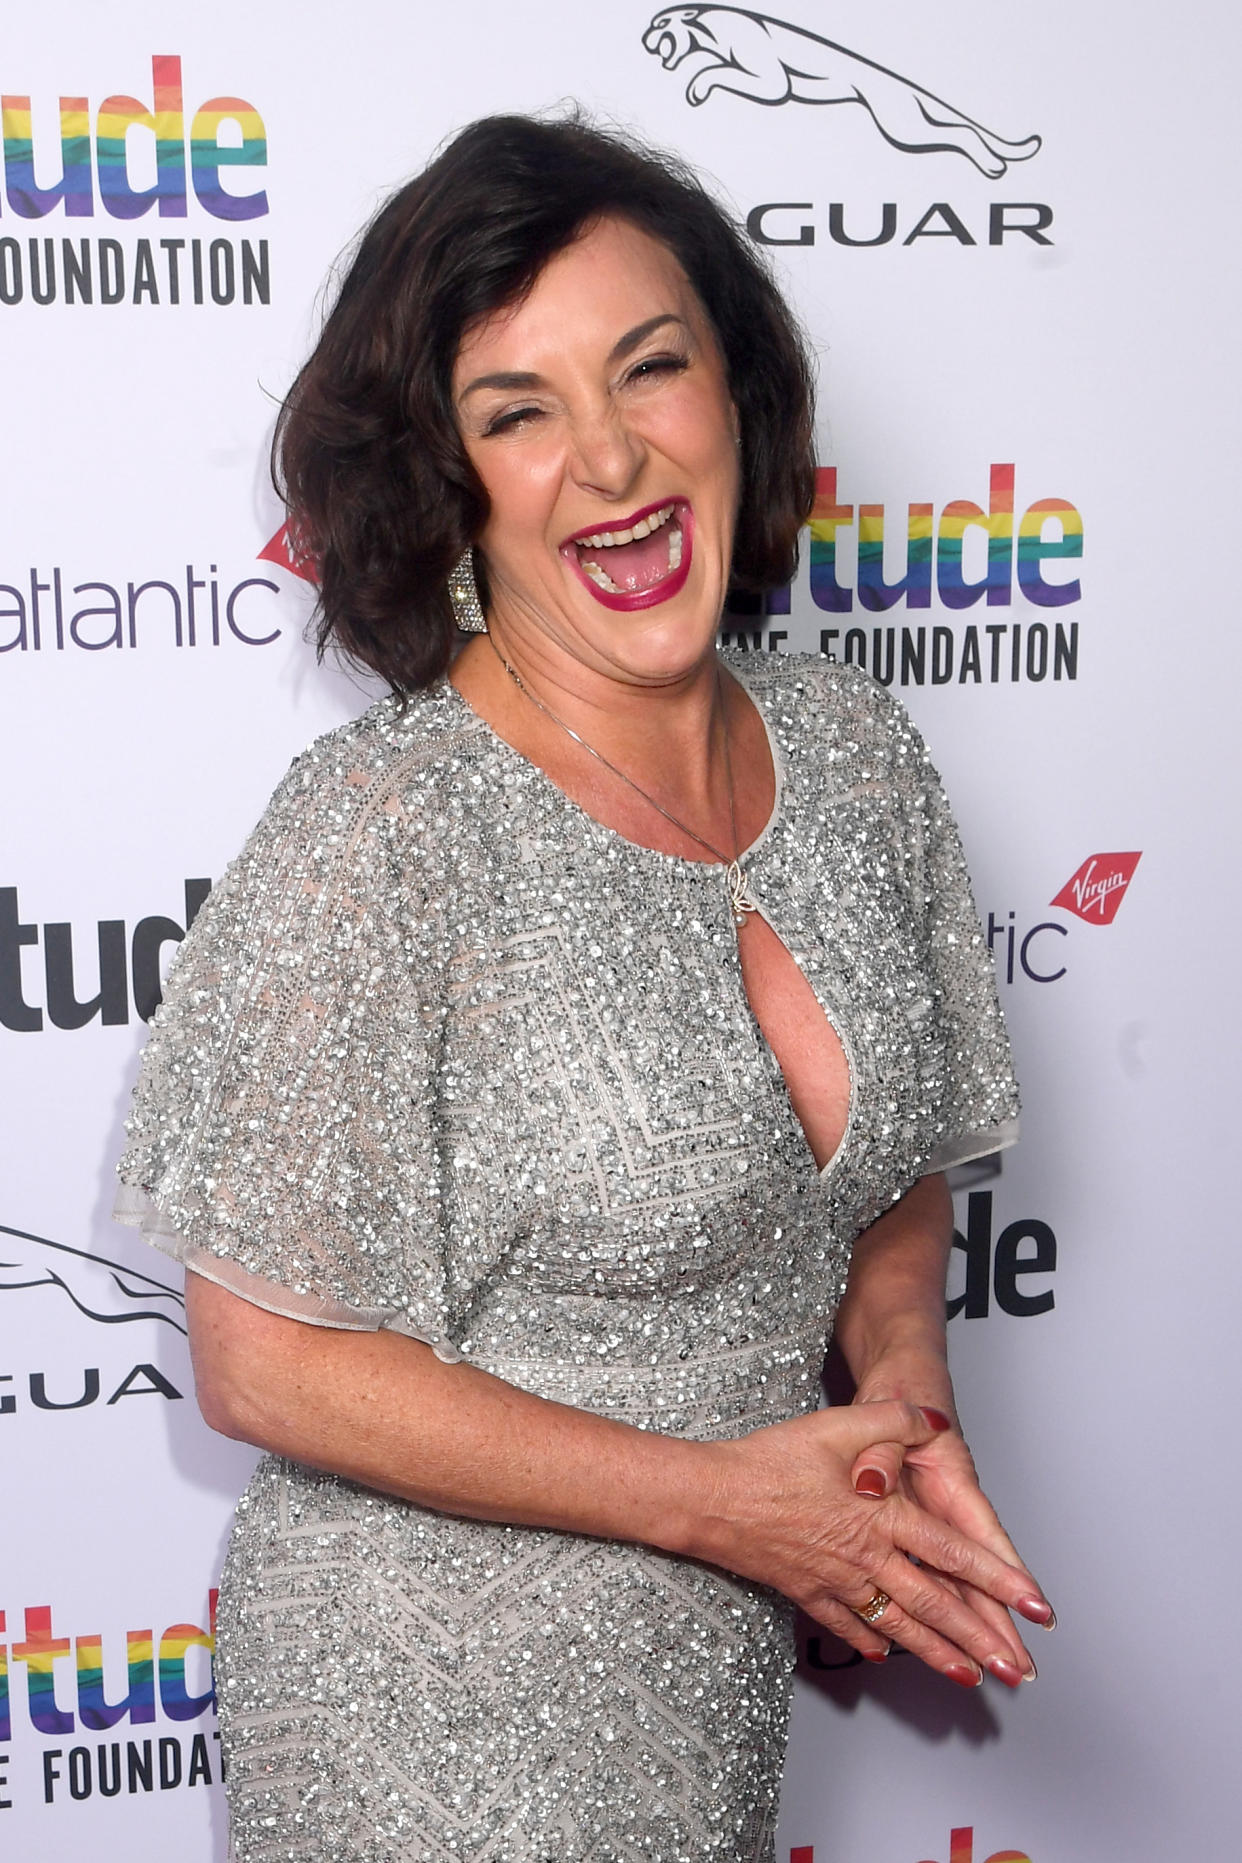 LONDON, ENGLAND - OCTOBER 09: Shirley Ballas attends the Attitude Awards 2019 at The Roundhouse on October 09, 2019 in London, England. (Photo by Dave J Hogan/Getty Images)